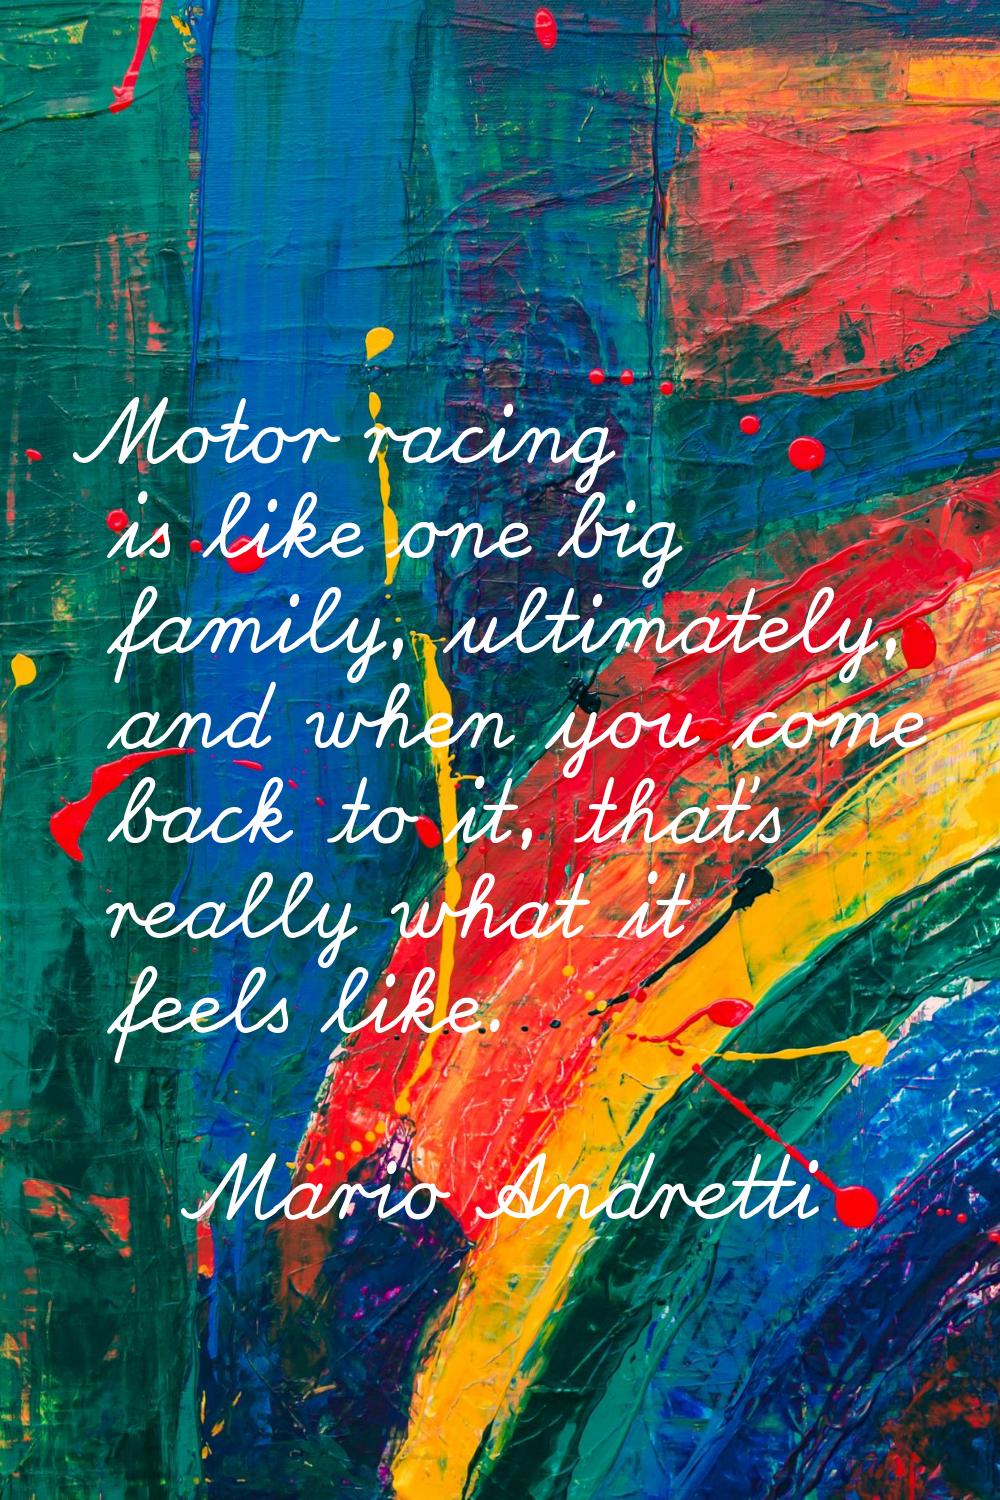 Motor racing is like one big family, ultimately, and when you come back to it, that's really what i